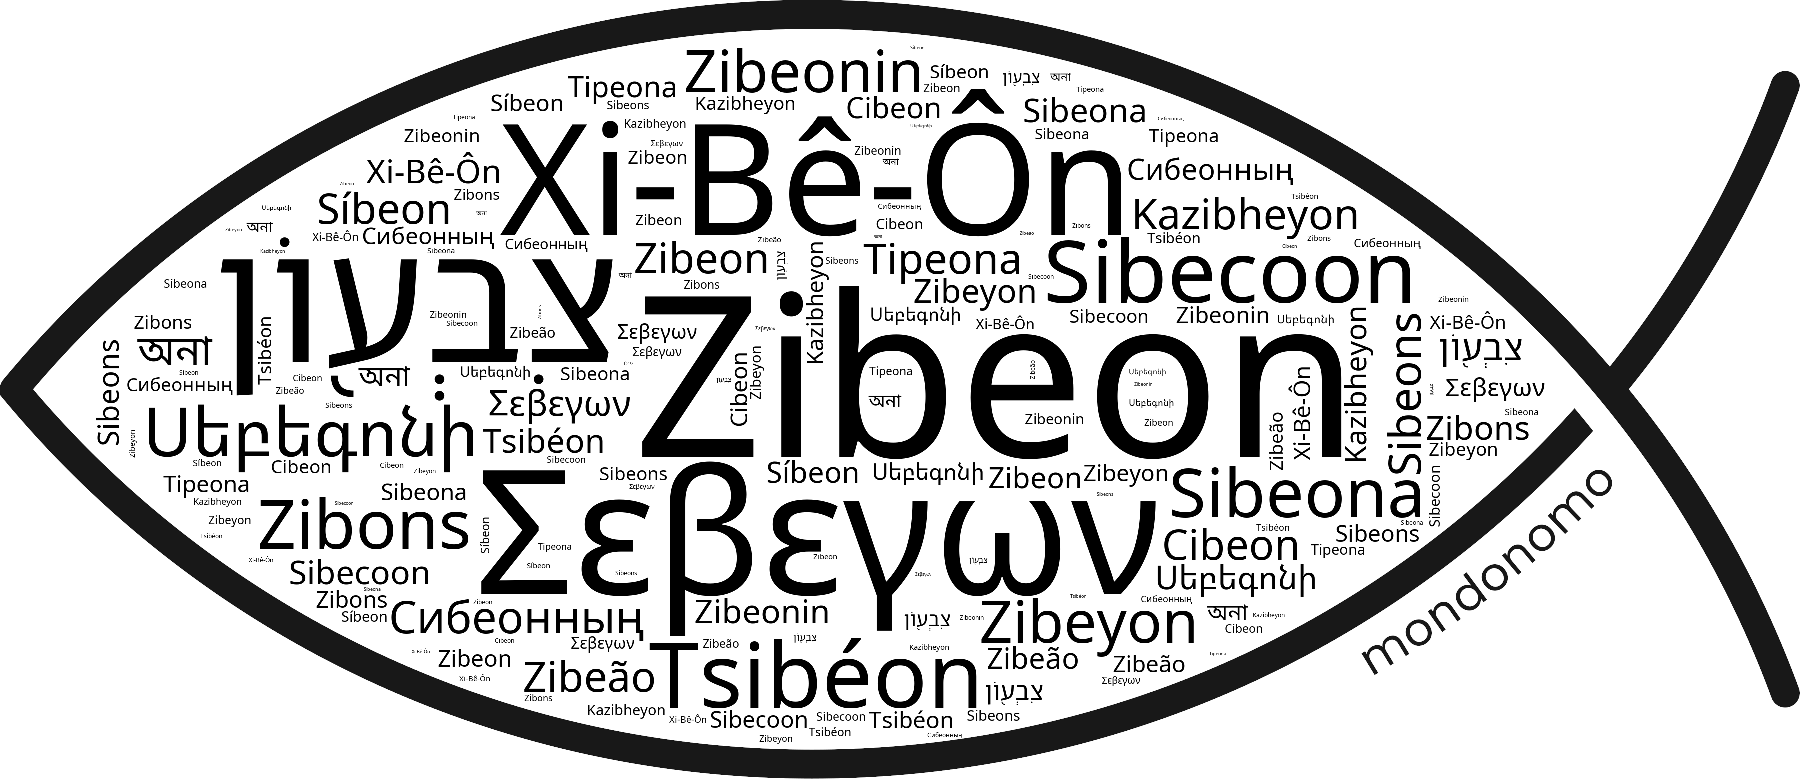 Name Zibeon in the world's Bibles